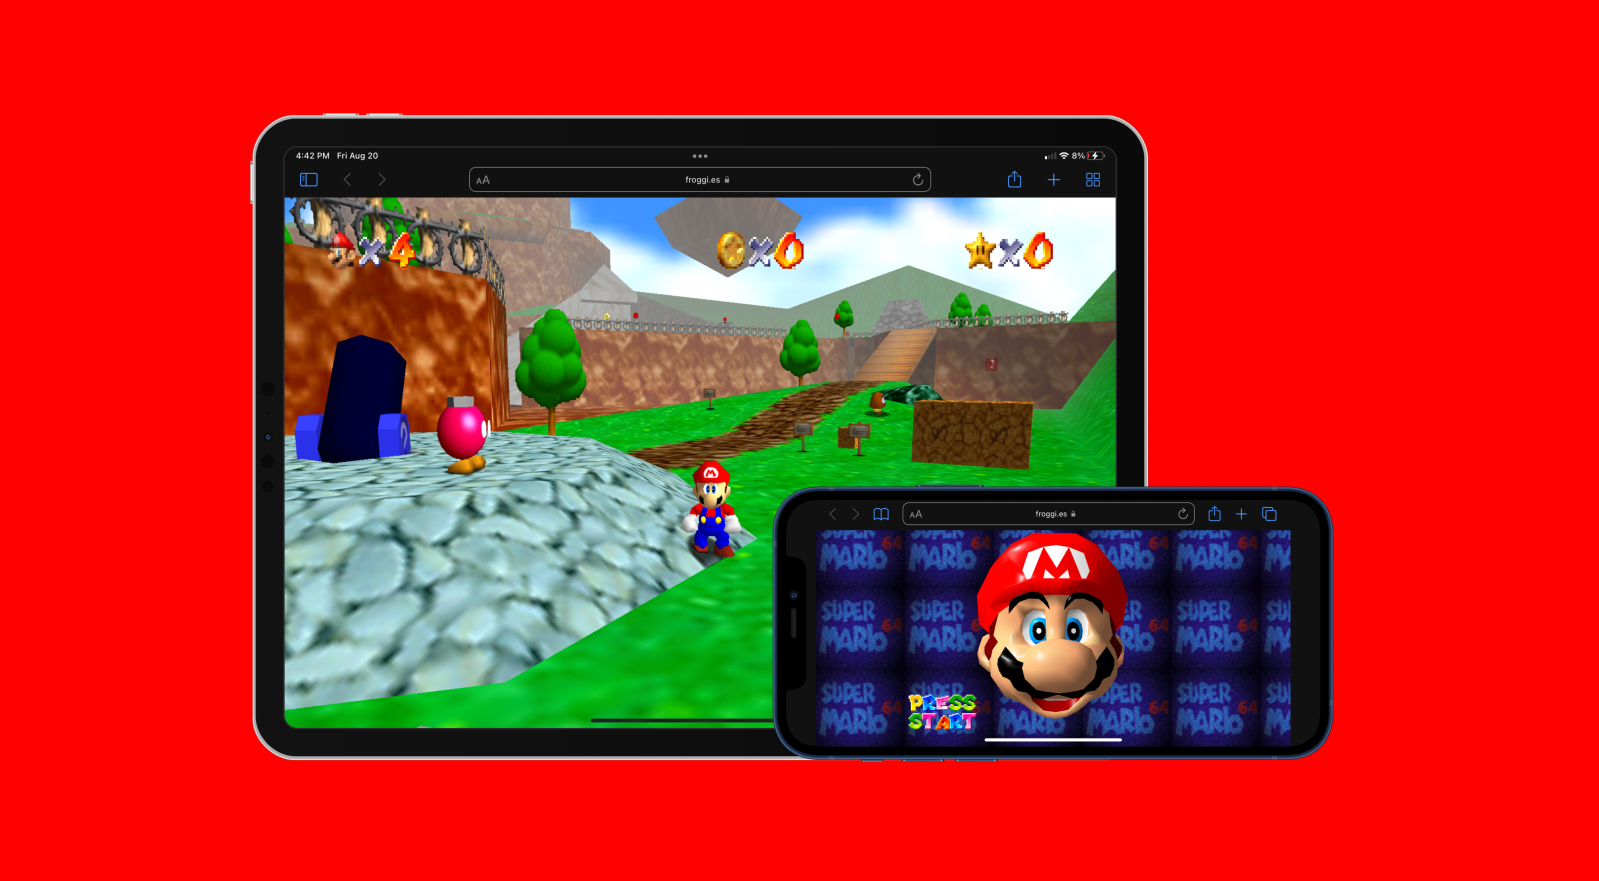 You can play 'Super Mario 64' in a web browser on iPhone, iPad, and Mac - 9to5Mac